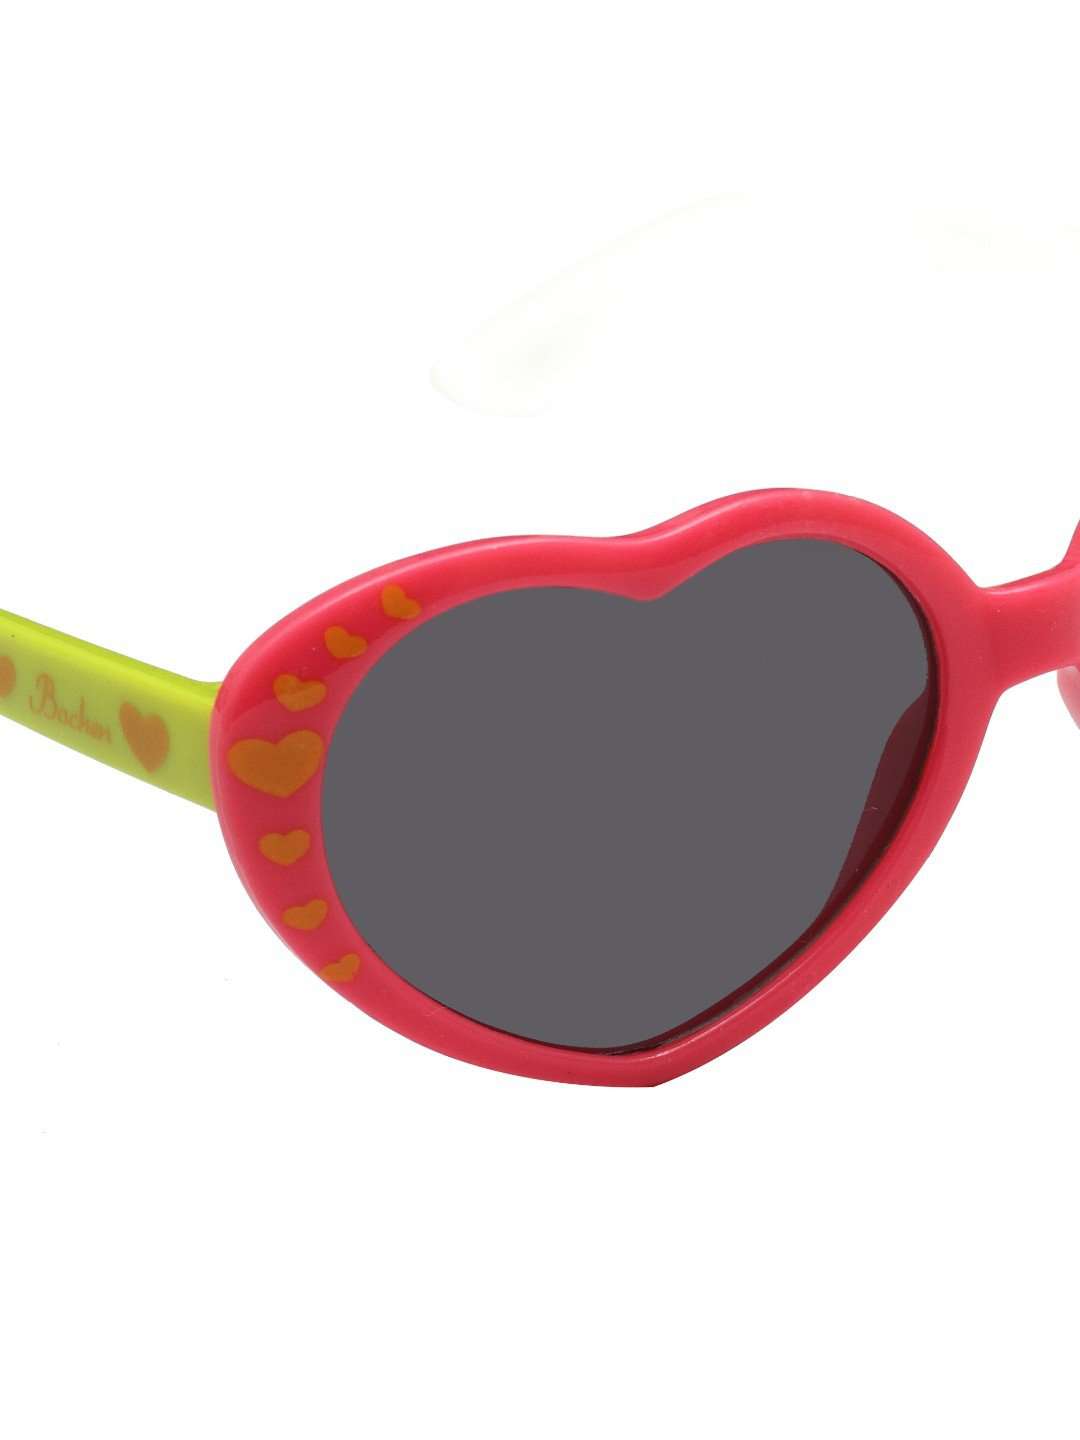 Stol'n Kids Pink and Green Heart Sunglasses - SWHF